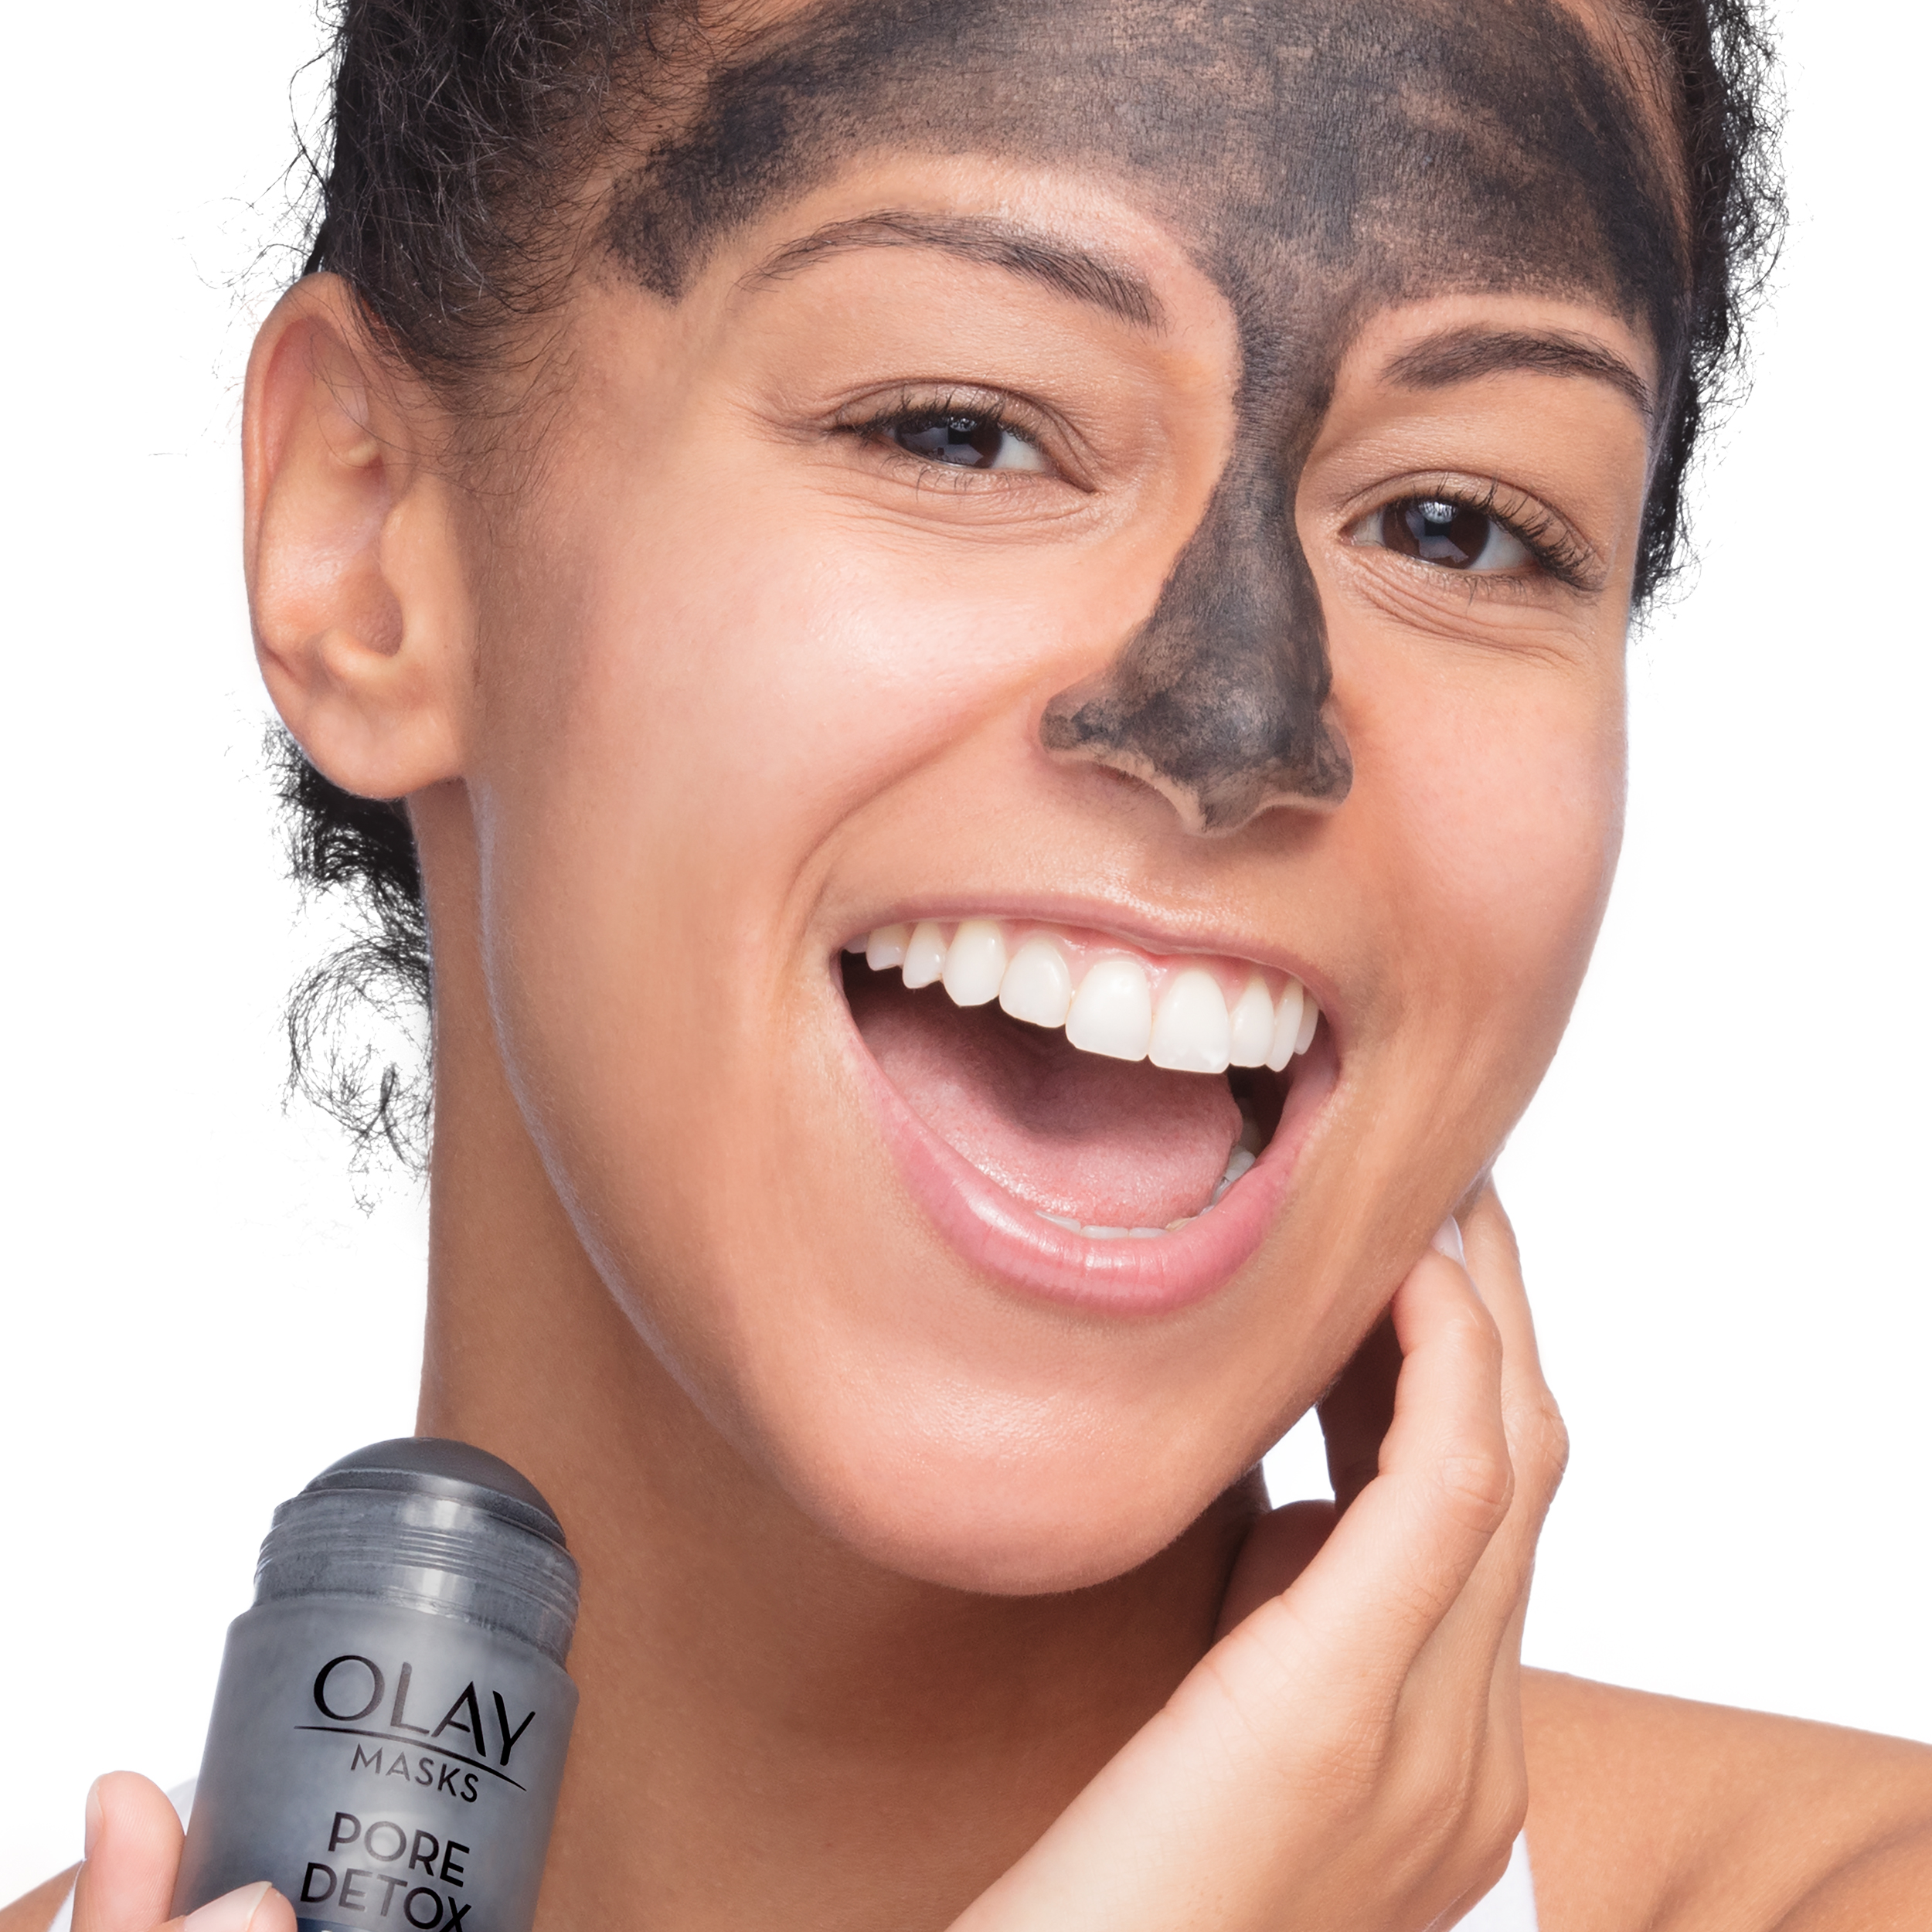 Olay Pore Detox Face Mask Clay Stick with Black Charcoal, 1.7 oz - image 4 of 10